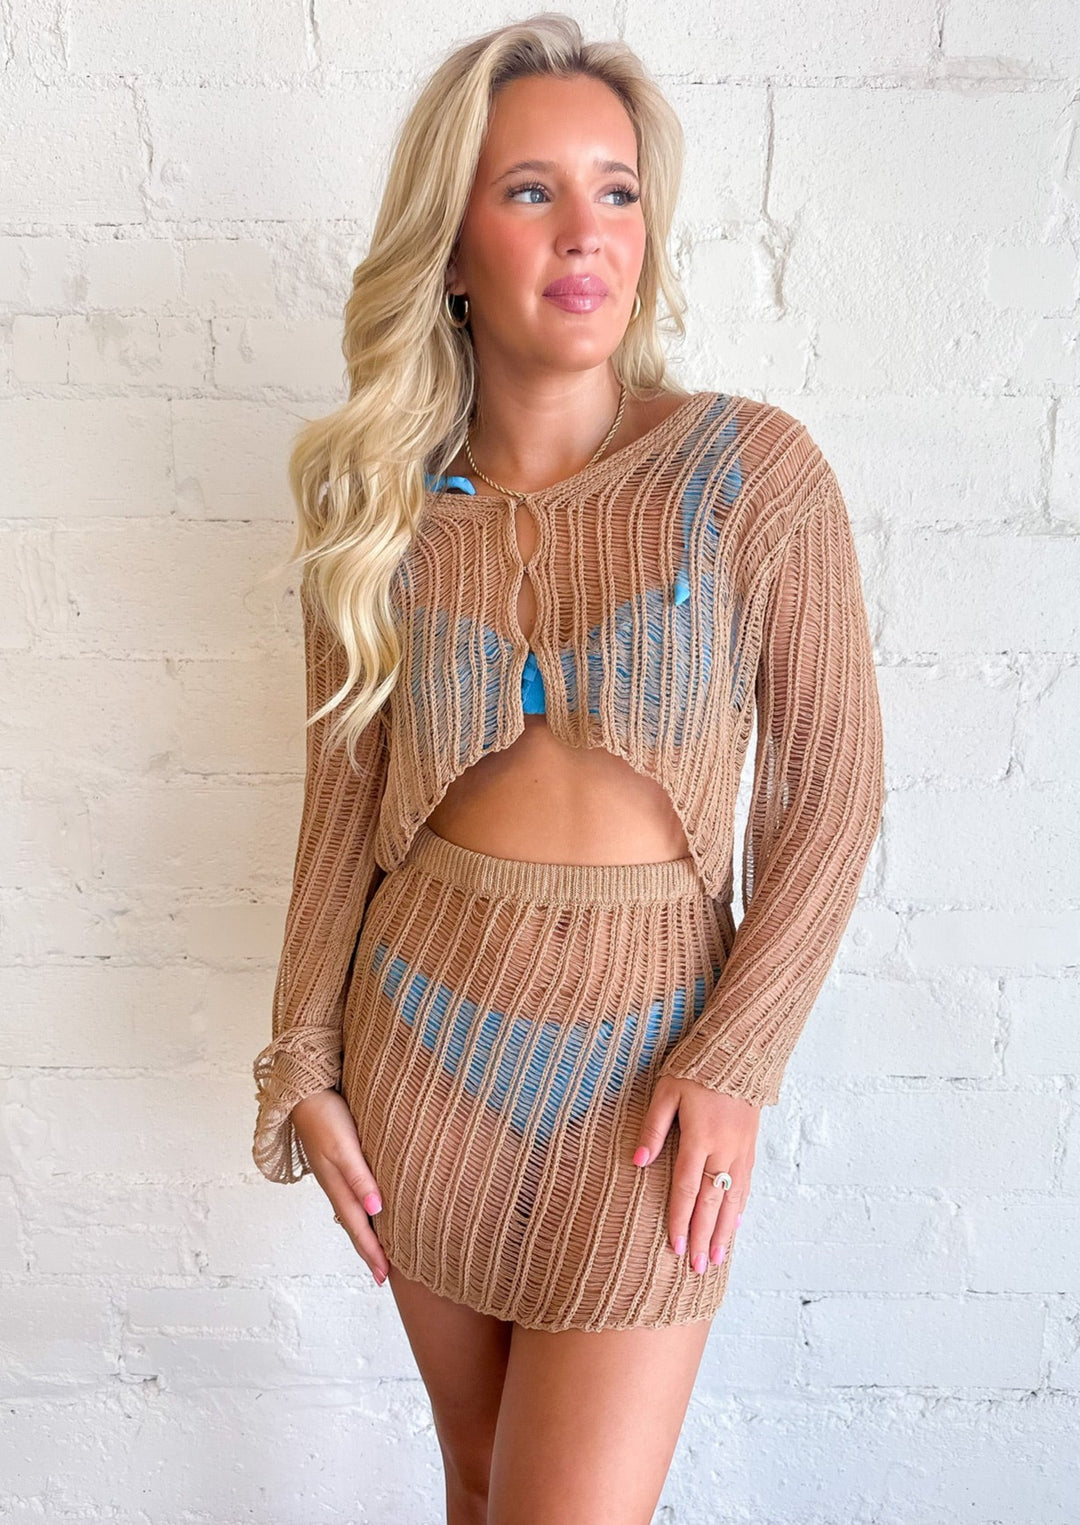 Time to Celebrate Crochet Skirt, Sweaters, Adeline, Adeline, dallas boutique, dallas texas, texas boutique, women's boutique dallas, adeline boutique, dallas boutique, trendy boutique, affordable boutique